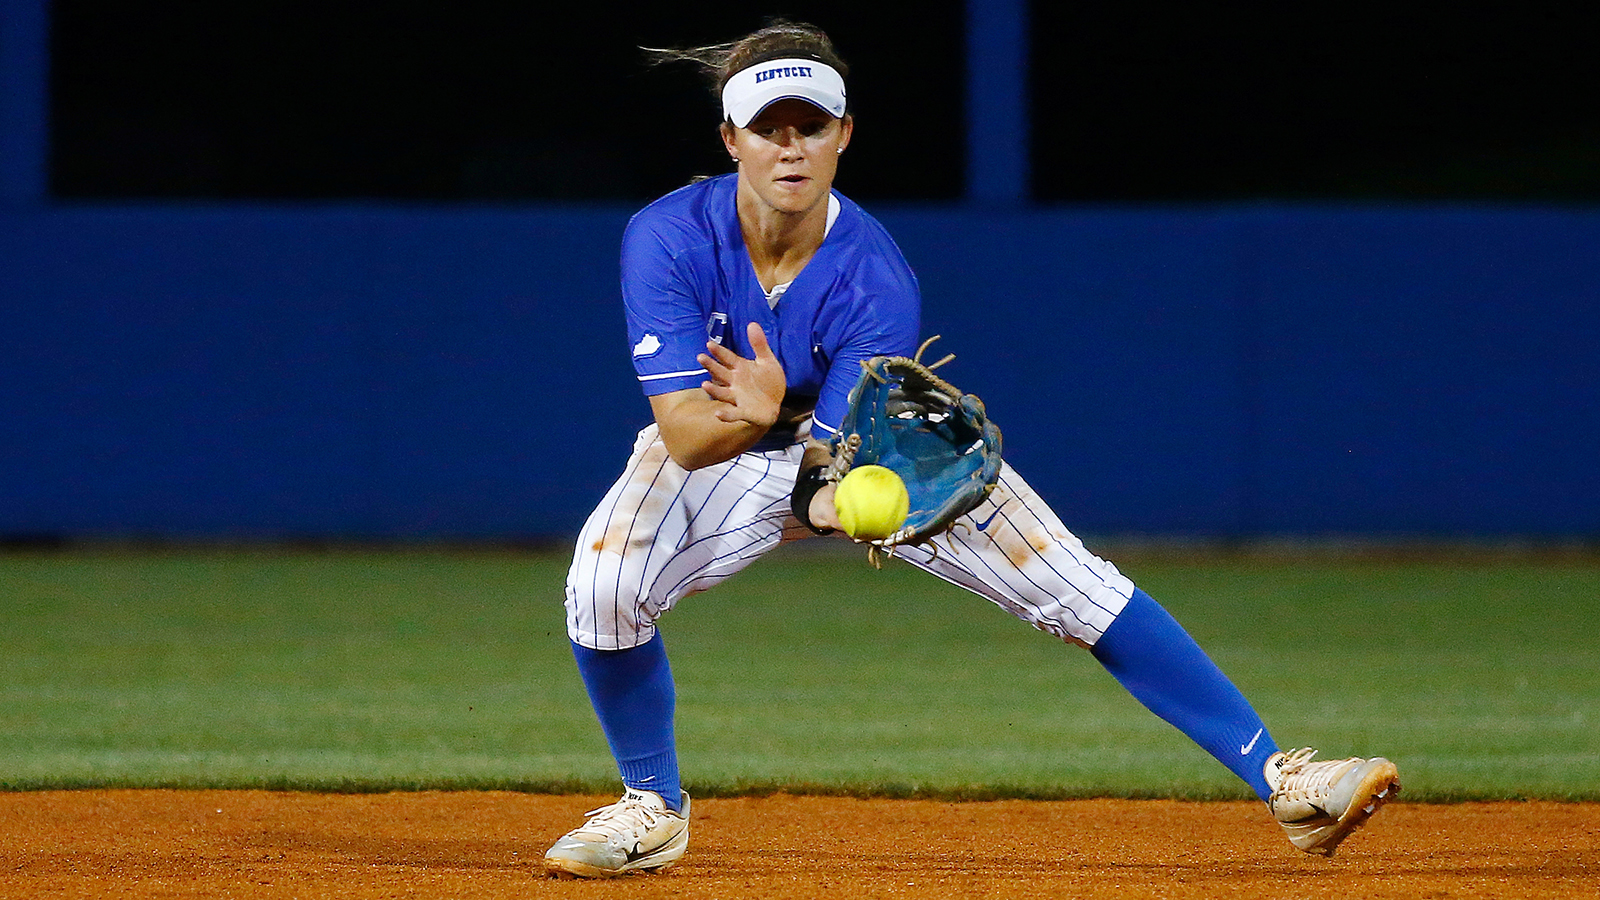 UK Softball's Reed Ready to Leave Lasting Legacy